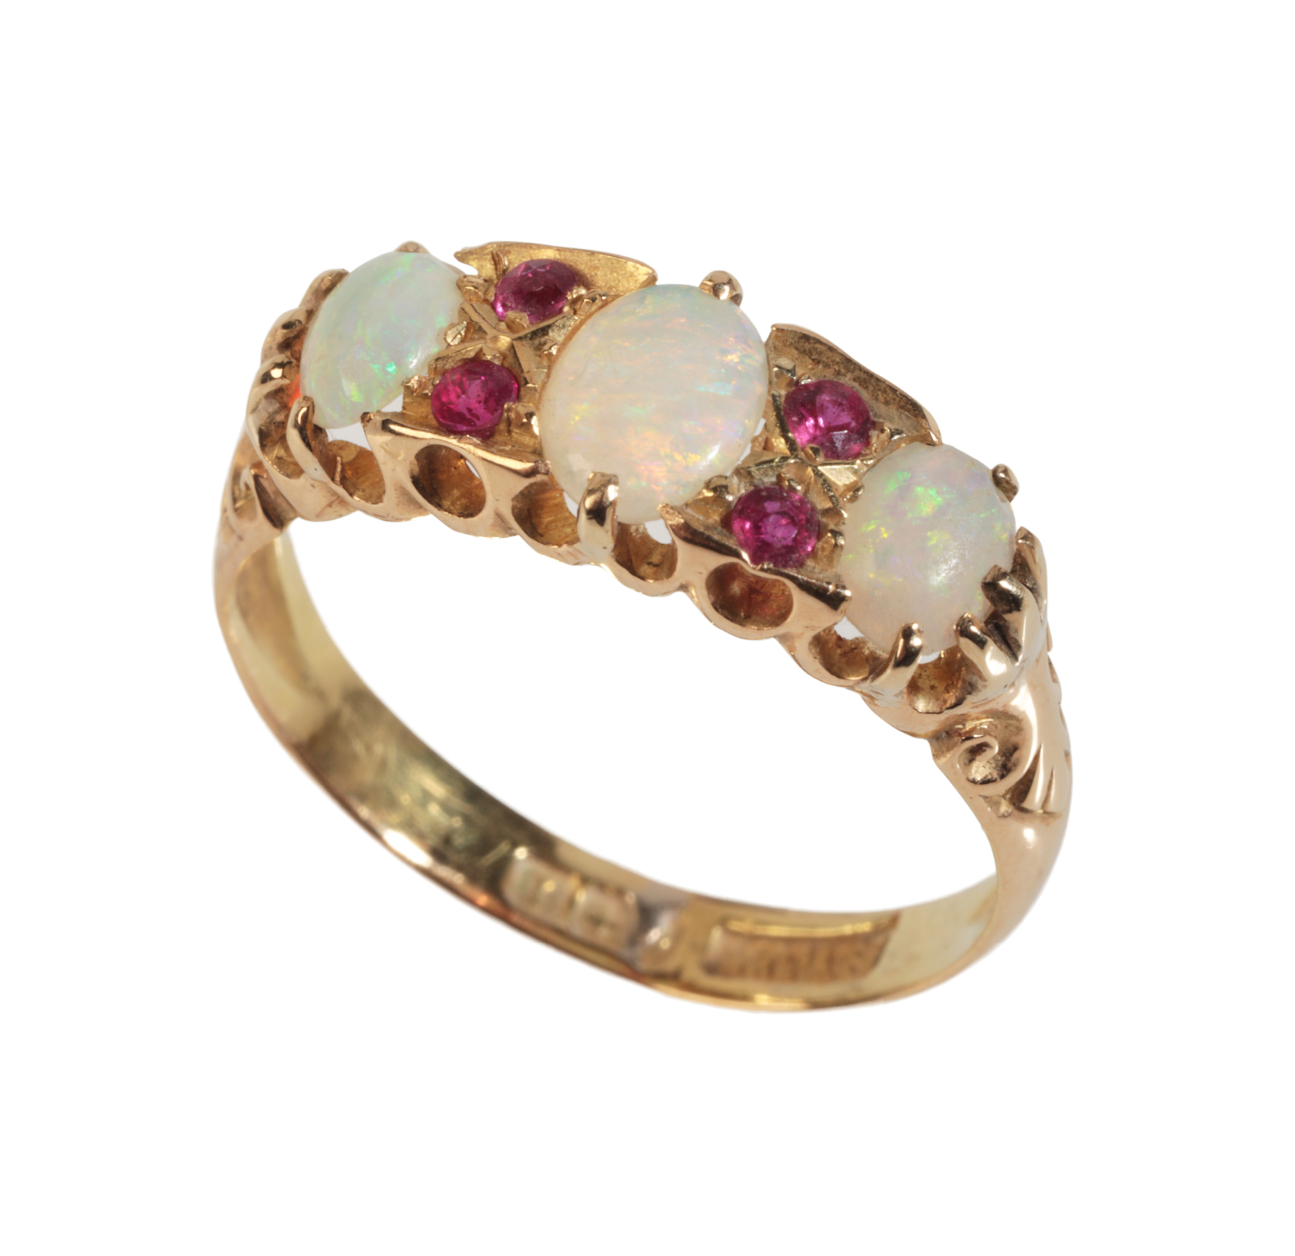 AN ANTIQUE OPAL AND RUBY RING